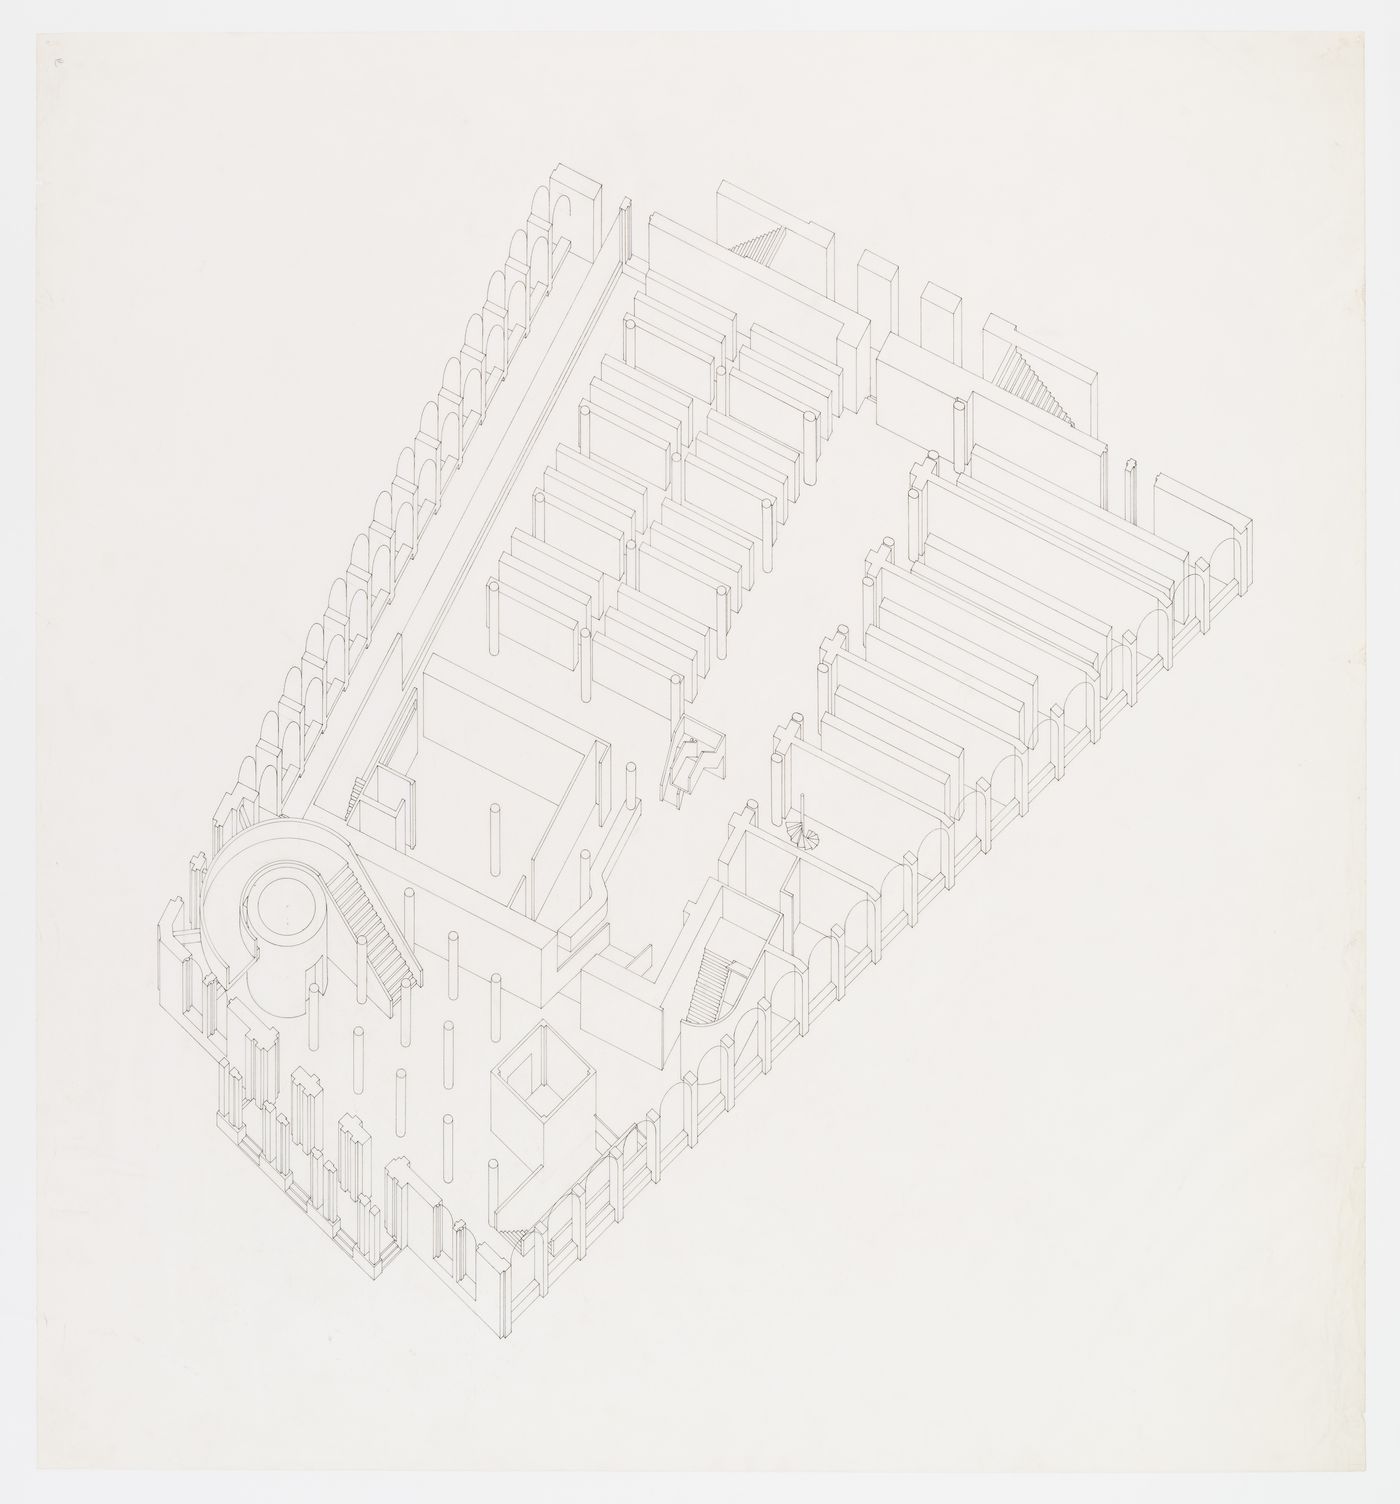 Interior axonometric for Cooper Union Foundation Building Renovation, New York, N.Y.